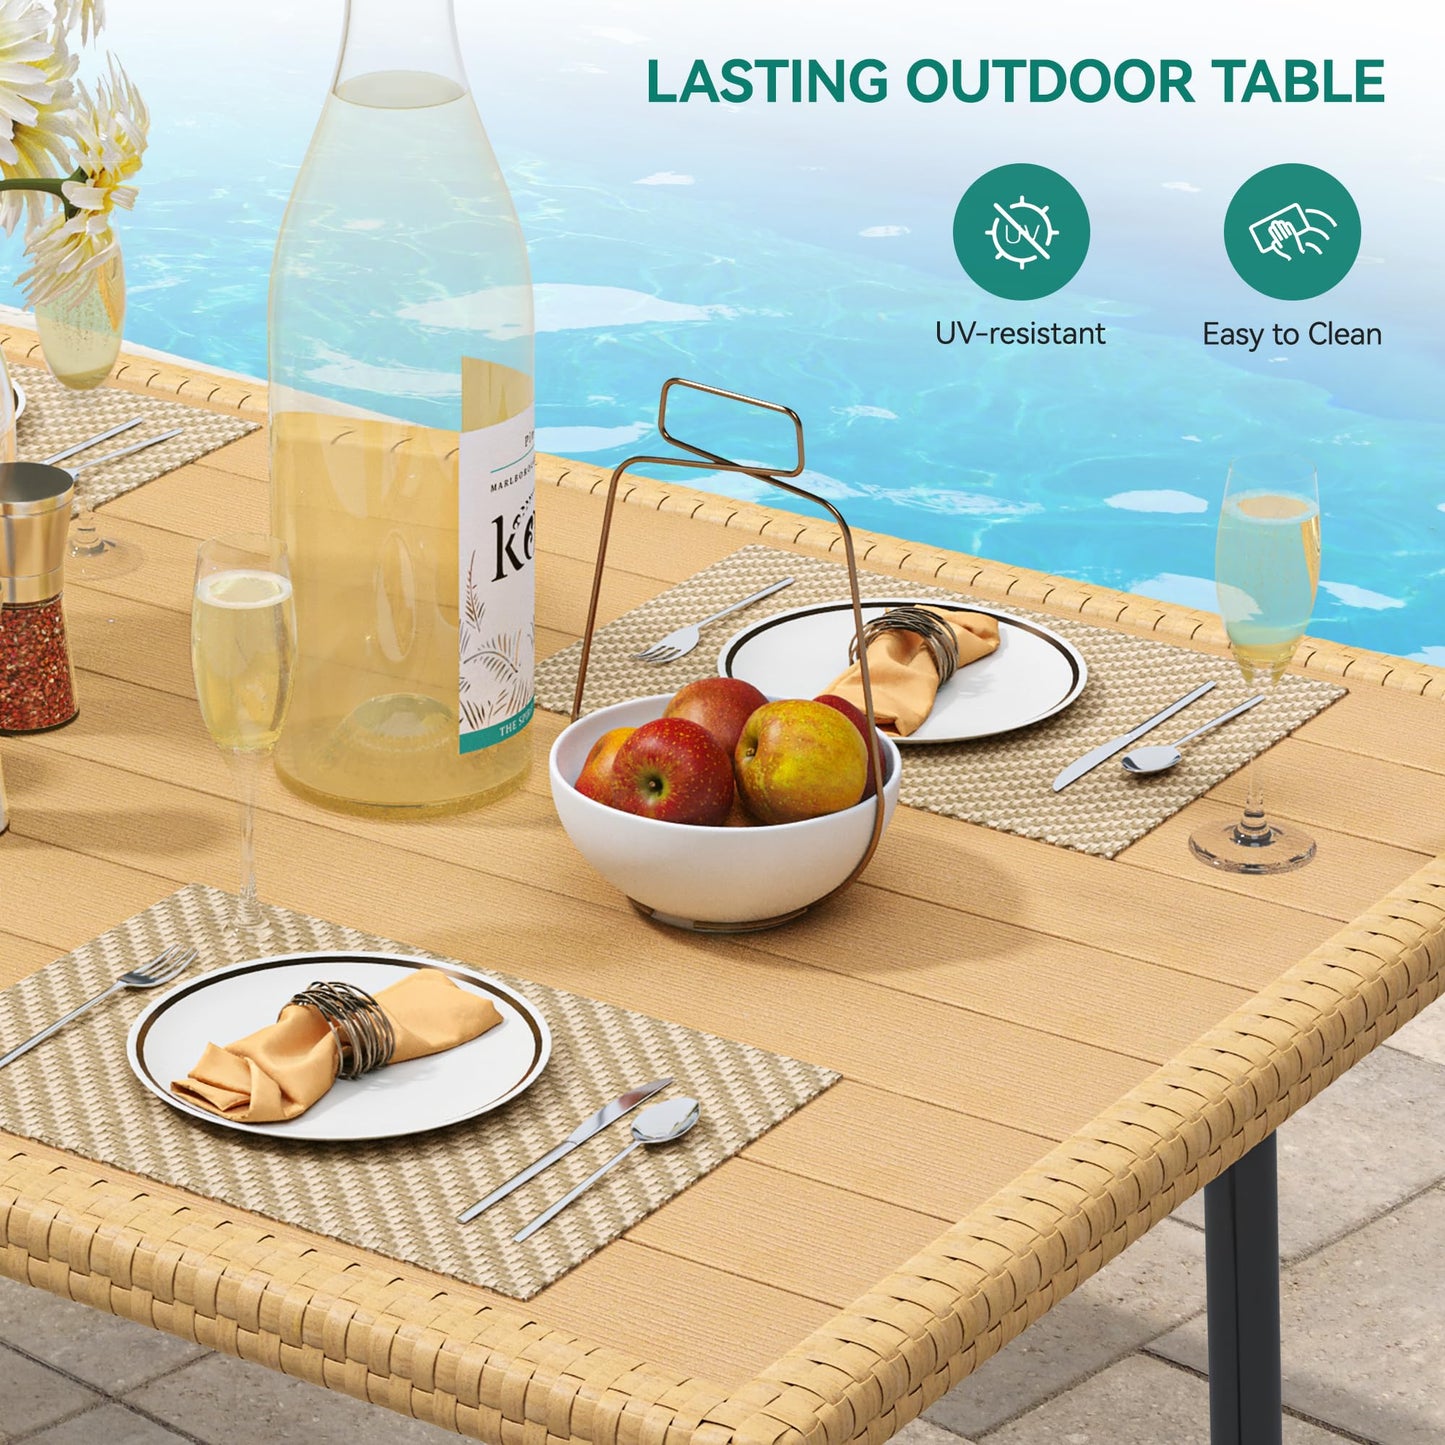 10-Piece Outdoor All-Weather Rattan Dining Set for Backyard Deck with Soft Cushions and Plastic Wood Dining Table (Light Brown+Black)